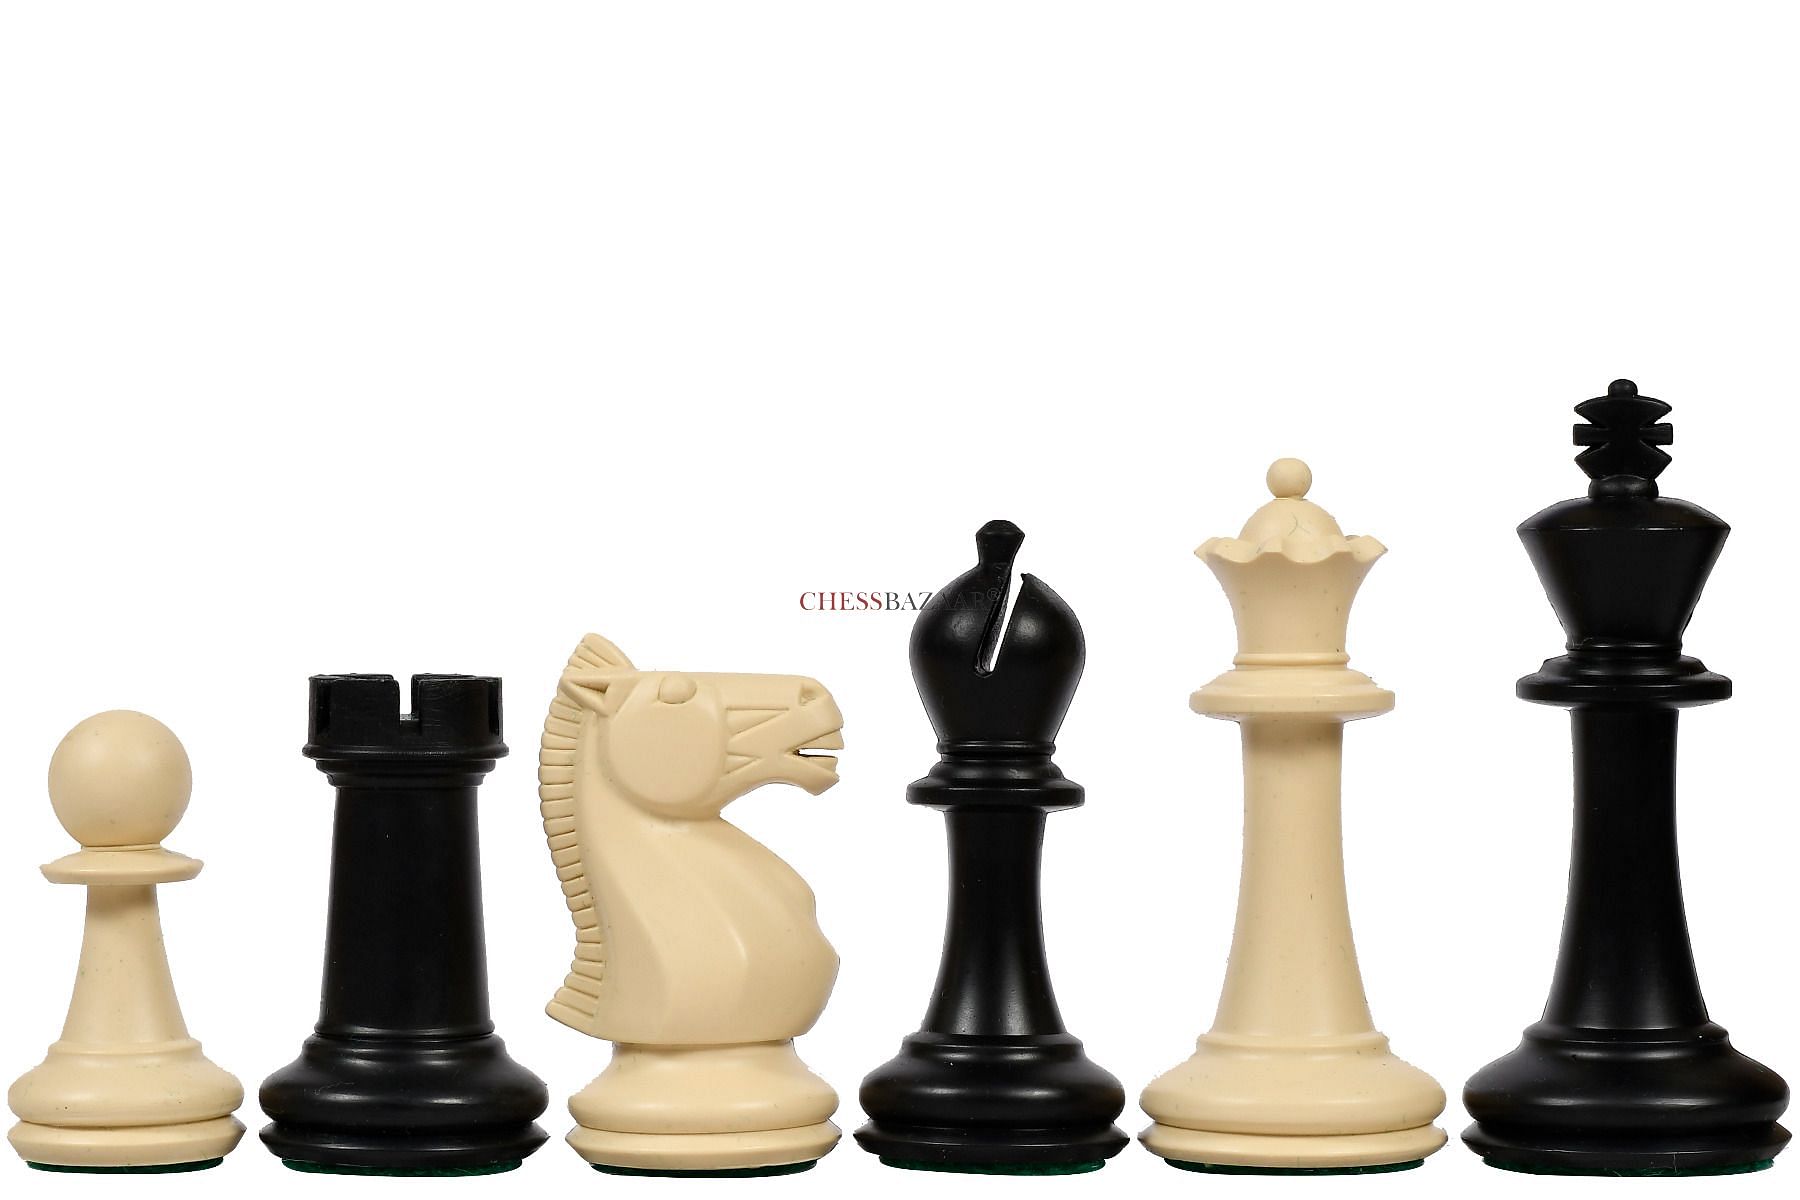 King and Queen Checkmate with the BOX method 